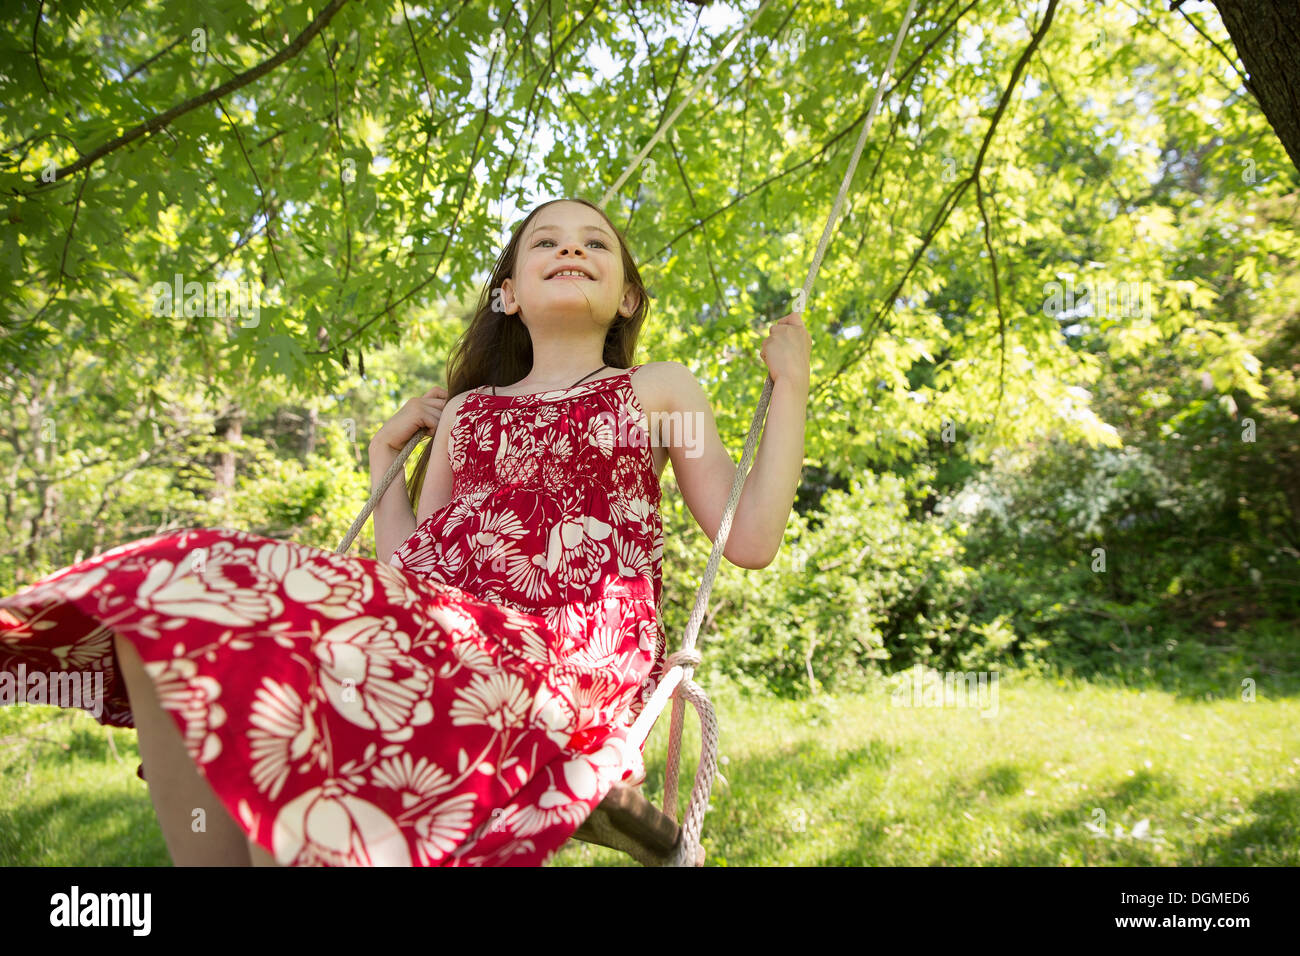 Summer. A girl in a sundress on a swing suspending from the branches of a tree. Stock Photo